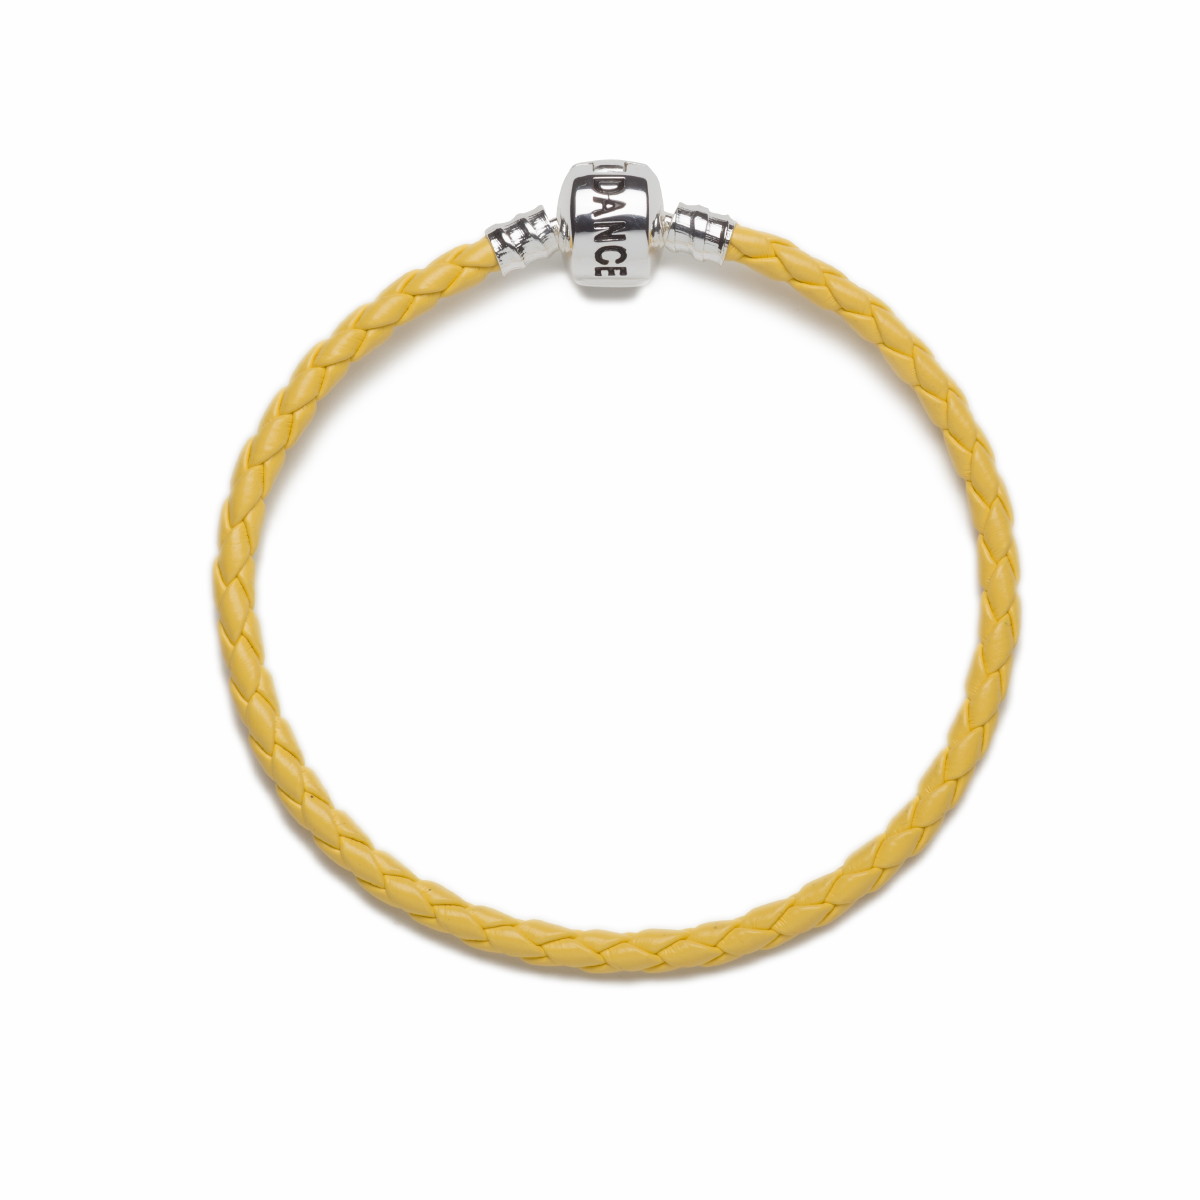 Official Riverdance20 Yellow Leather Style Charm Bracelet